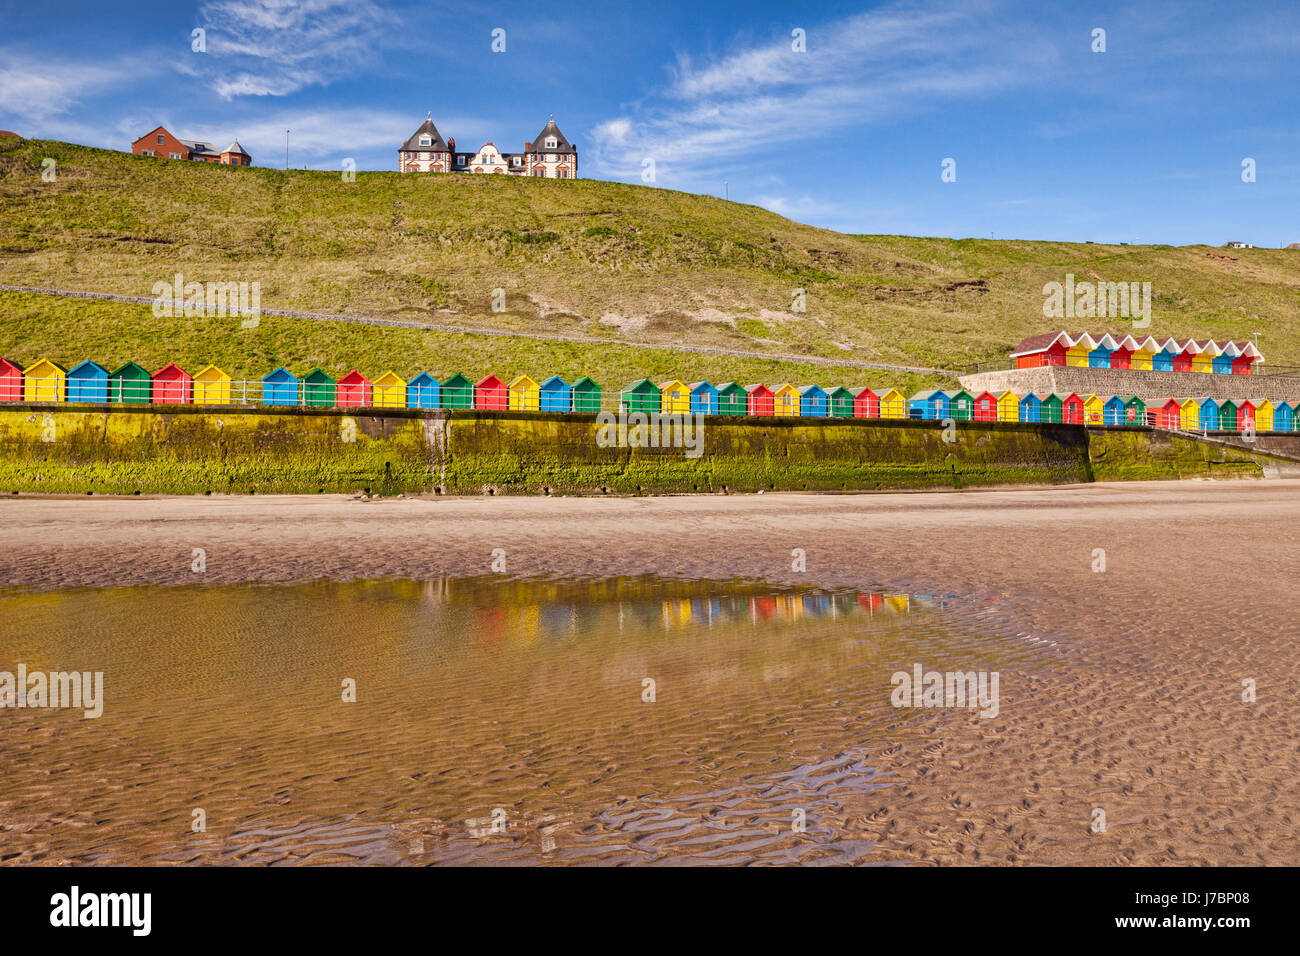 Beach huts lining the promenade and reflecting in a pool at North Beach, Whitby, North Yorkshire, England, UK, on a bright sunny spring morning. Stock Photo